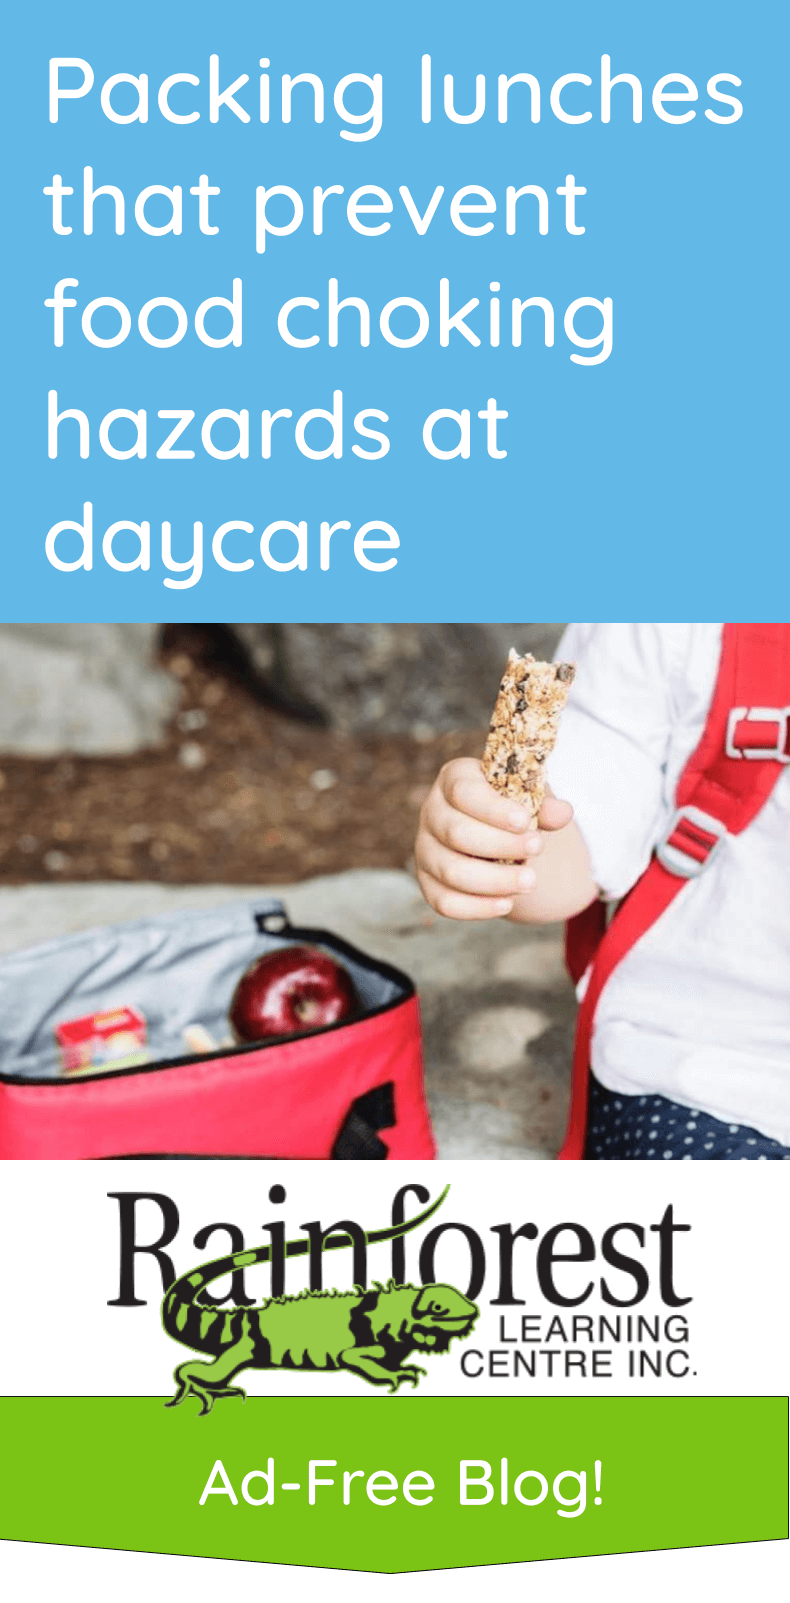 Packing lunches that prevent food choking hazards at daycare - article pinterest image